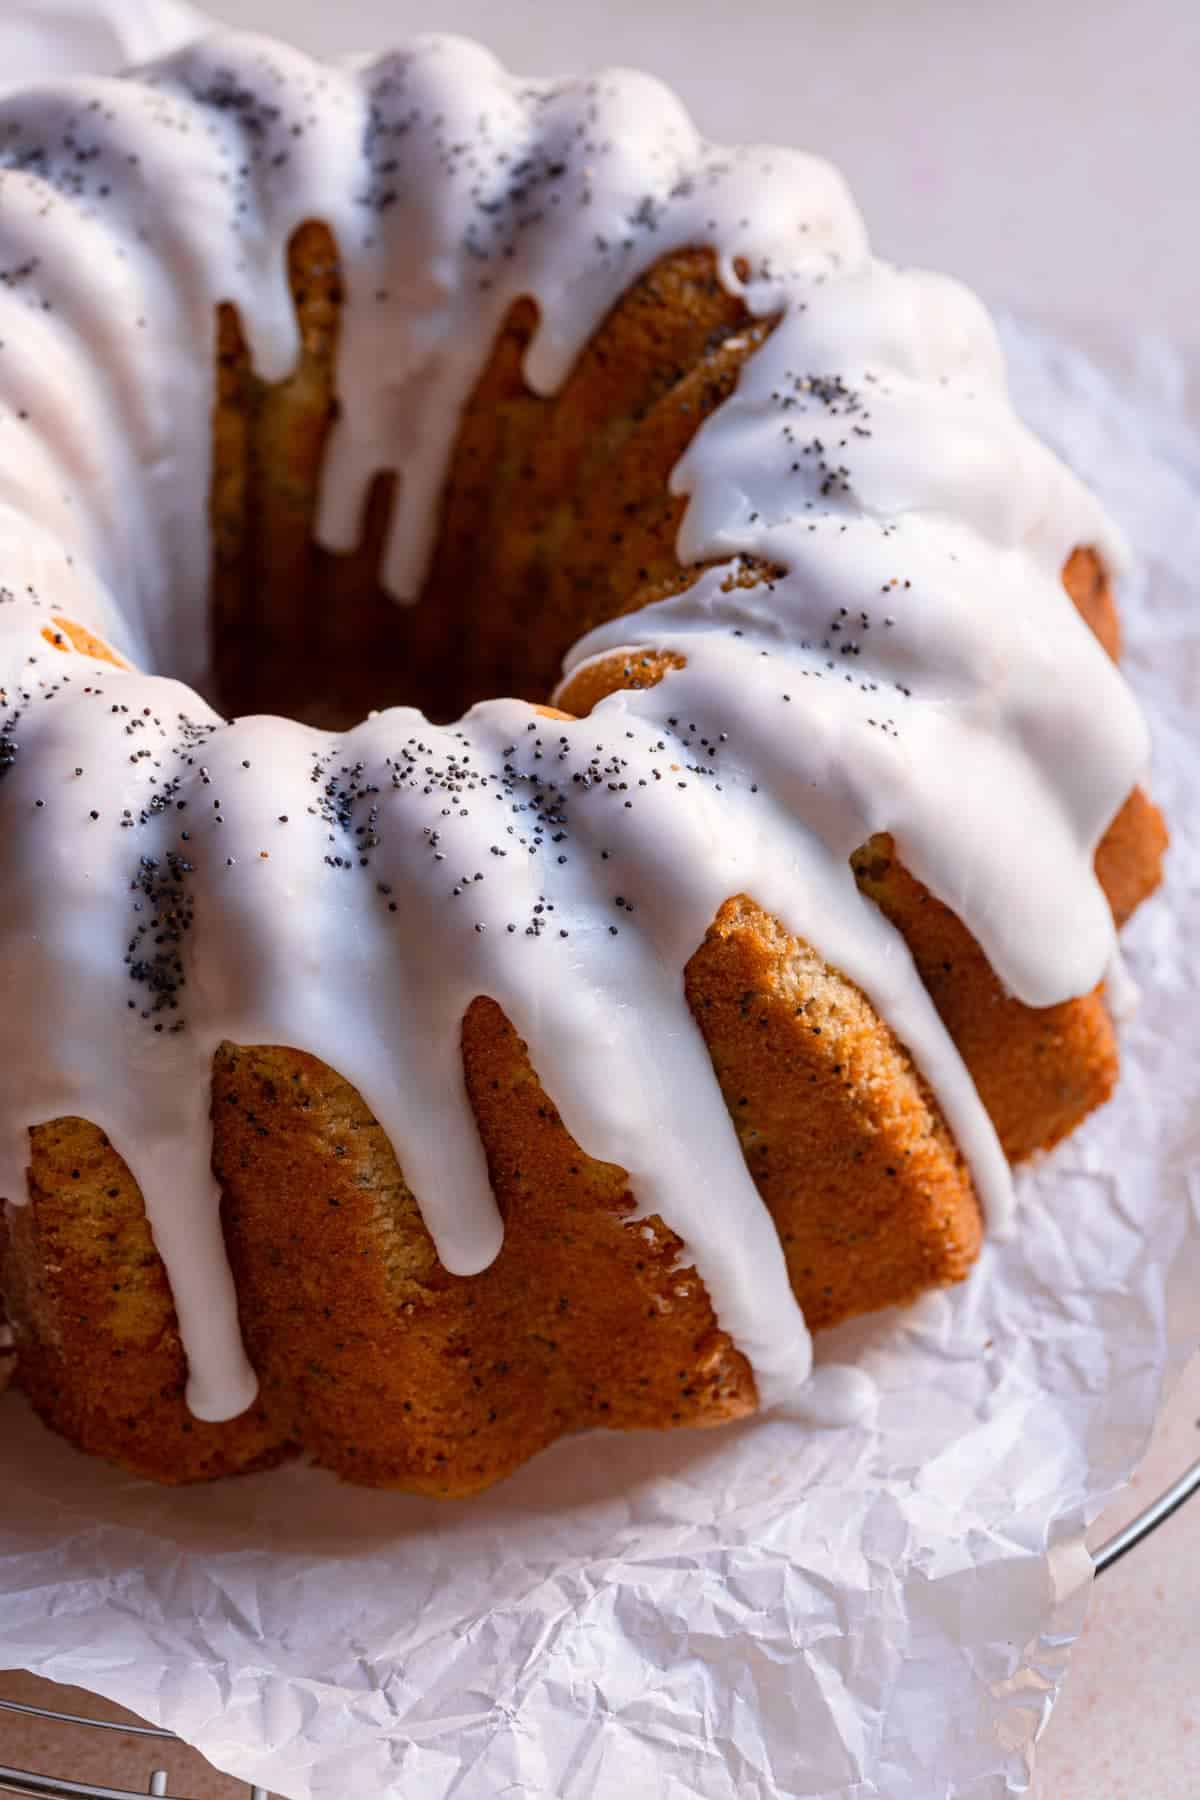 Almond Poppyseed cake is moist, tender, soft, and flavorful.